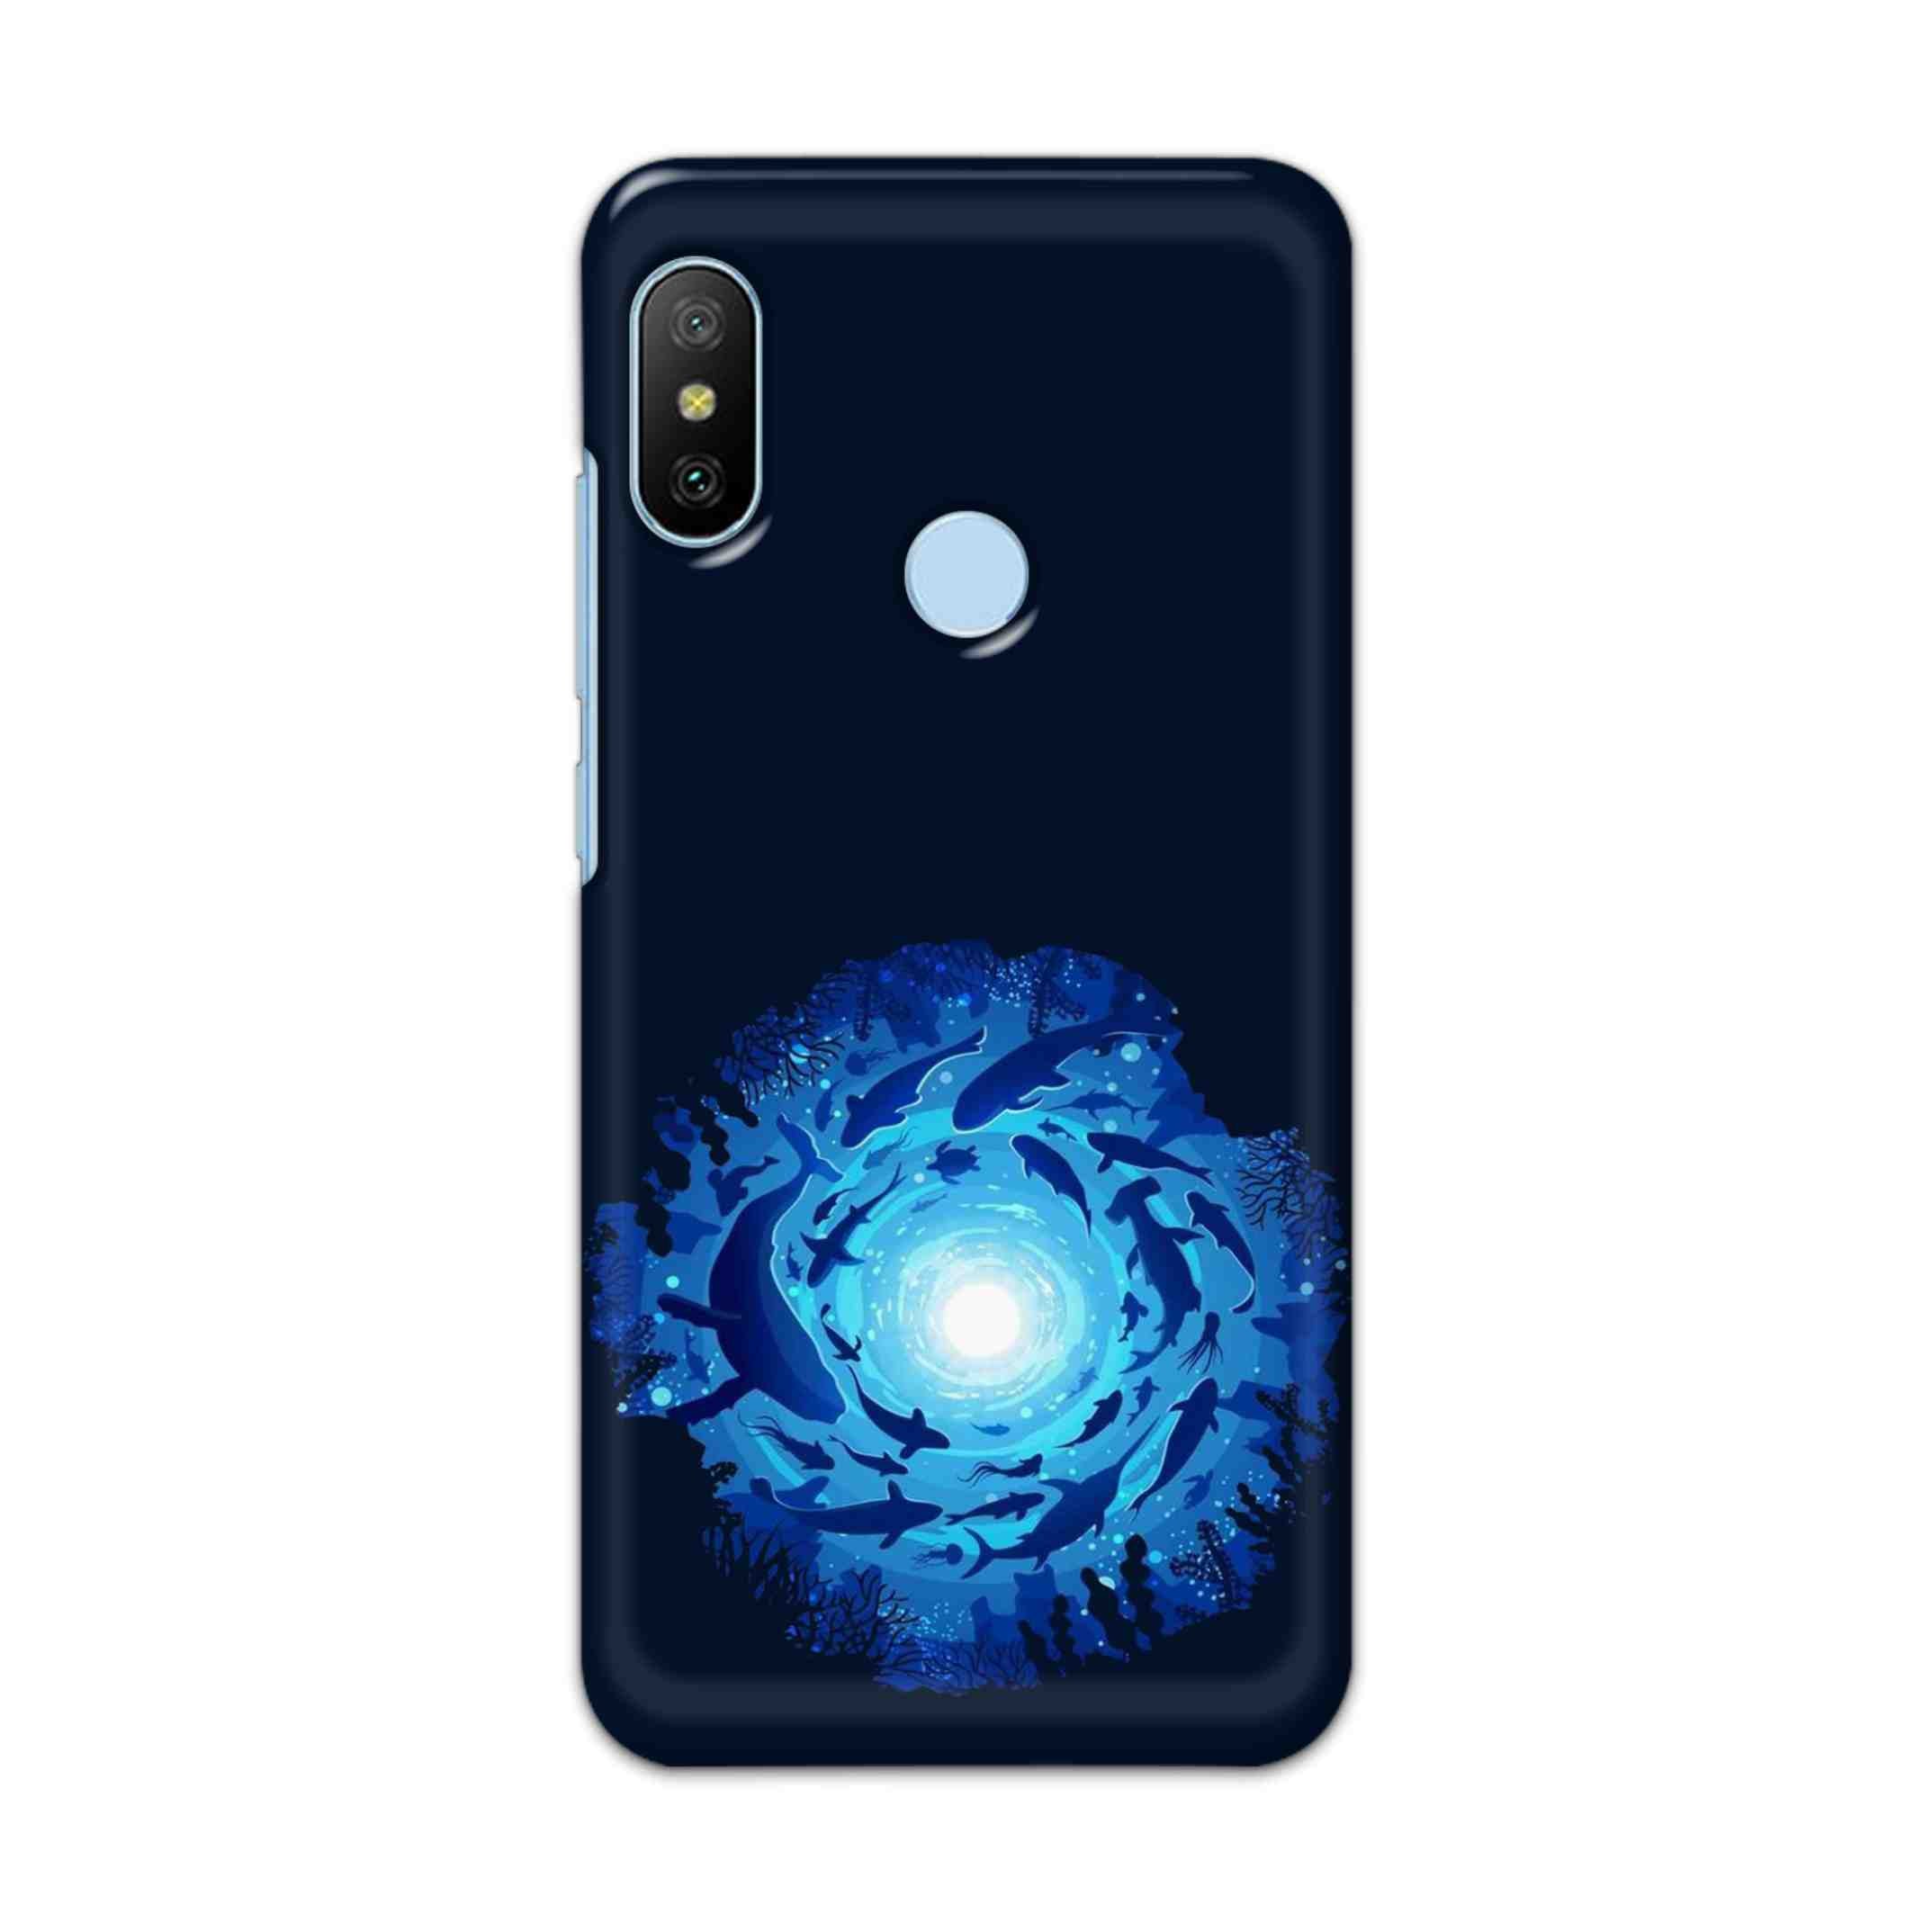 Buy Blue Whale Hard Back Mobile Phone Case/Cover For Xiaomi A2 / 6X Online